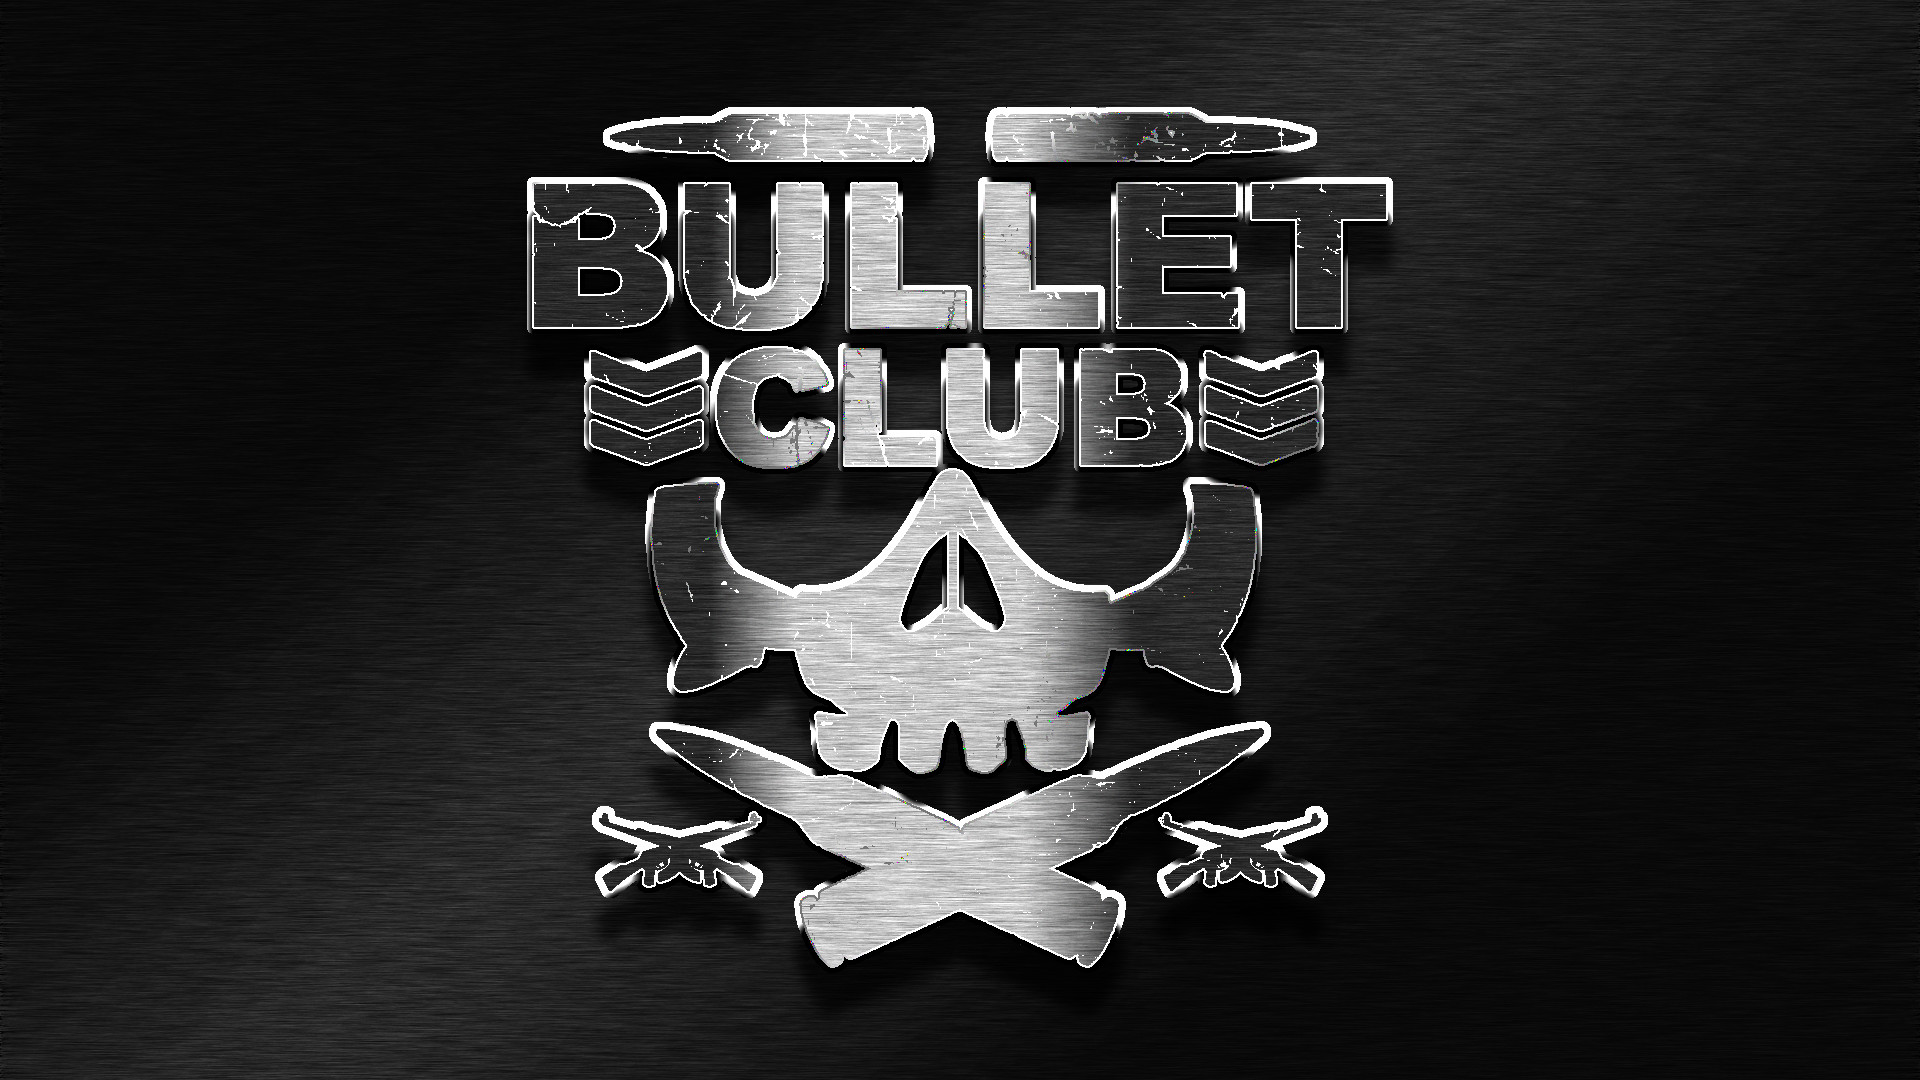 1920x1080 Bullet Club Logo Wallpaper (1080p) by DarkVoidPictures